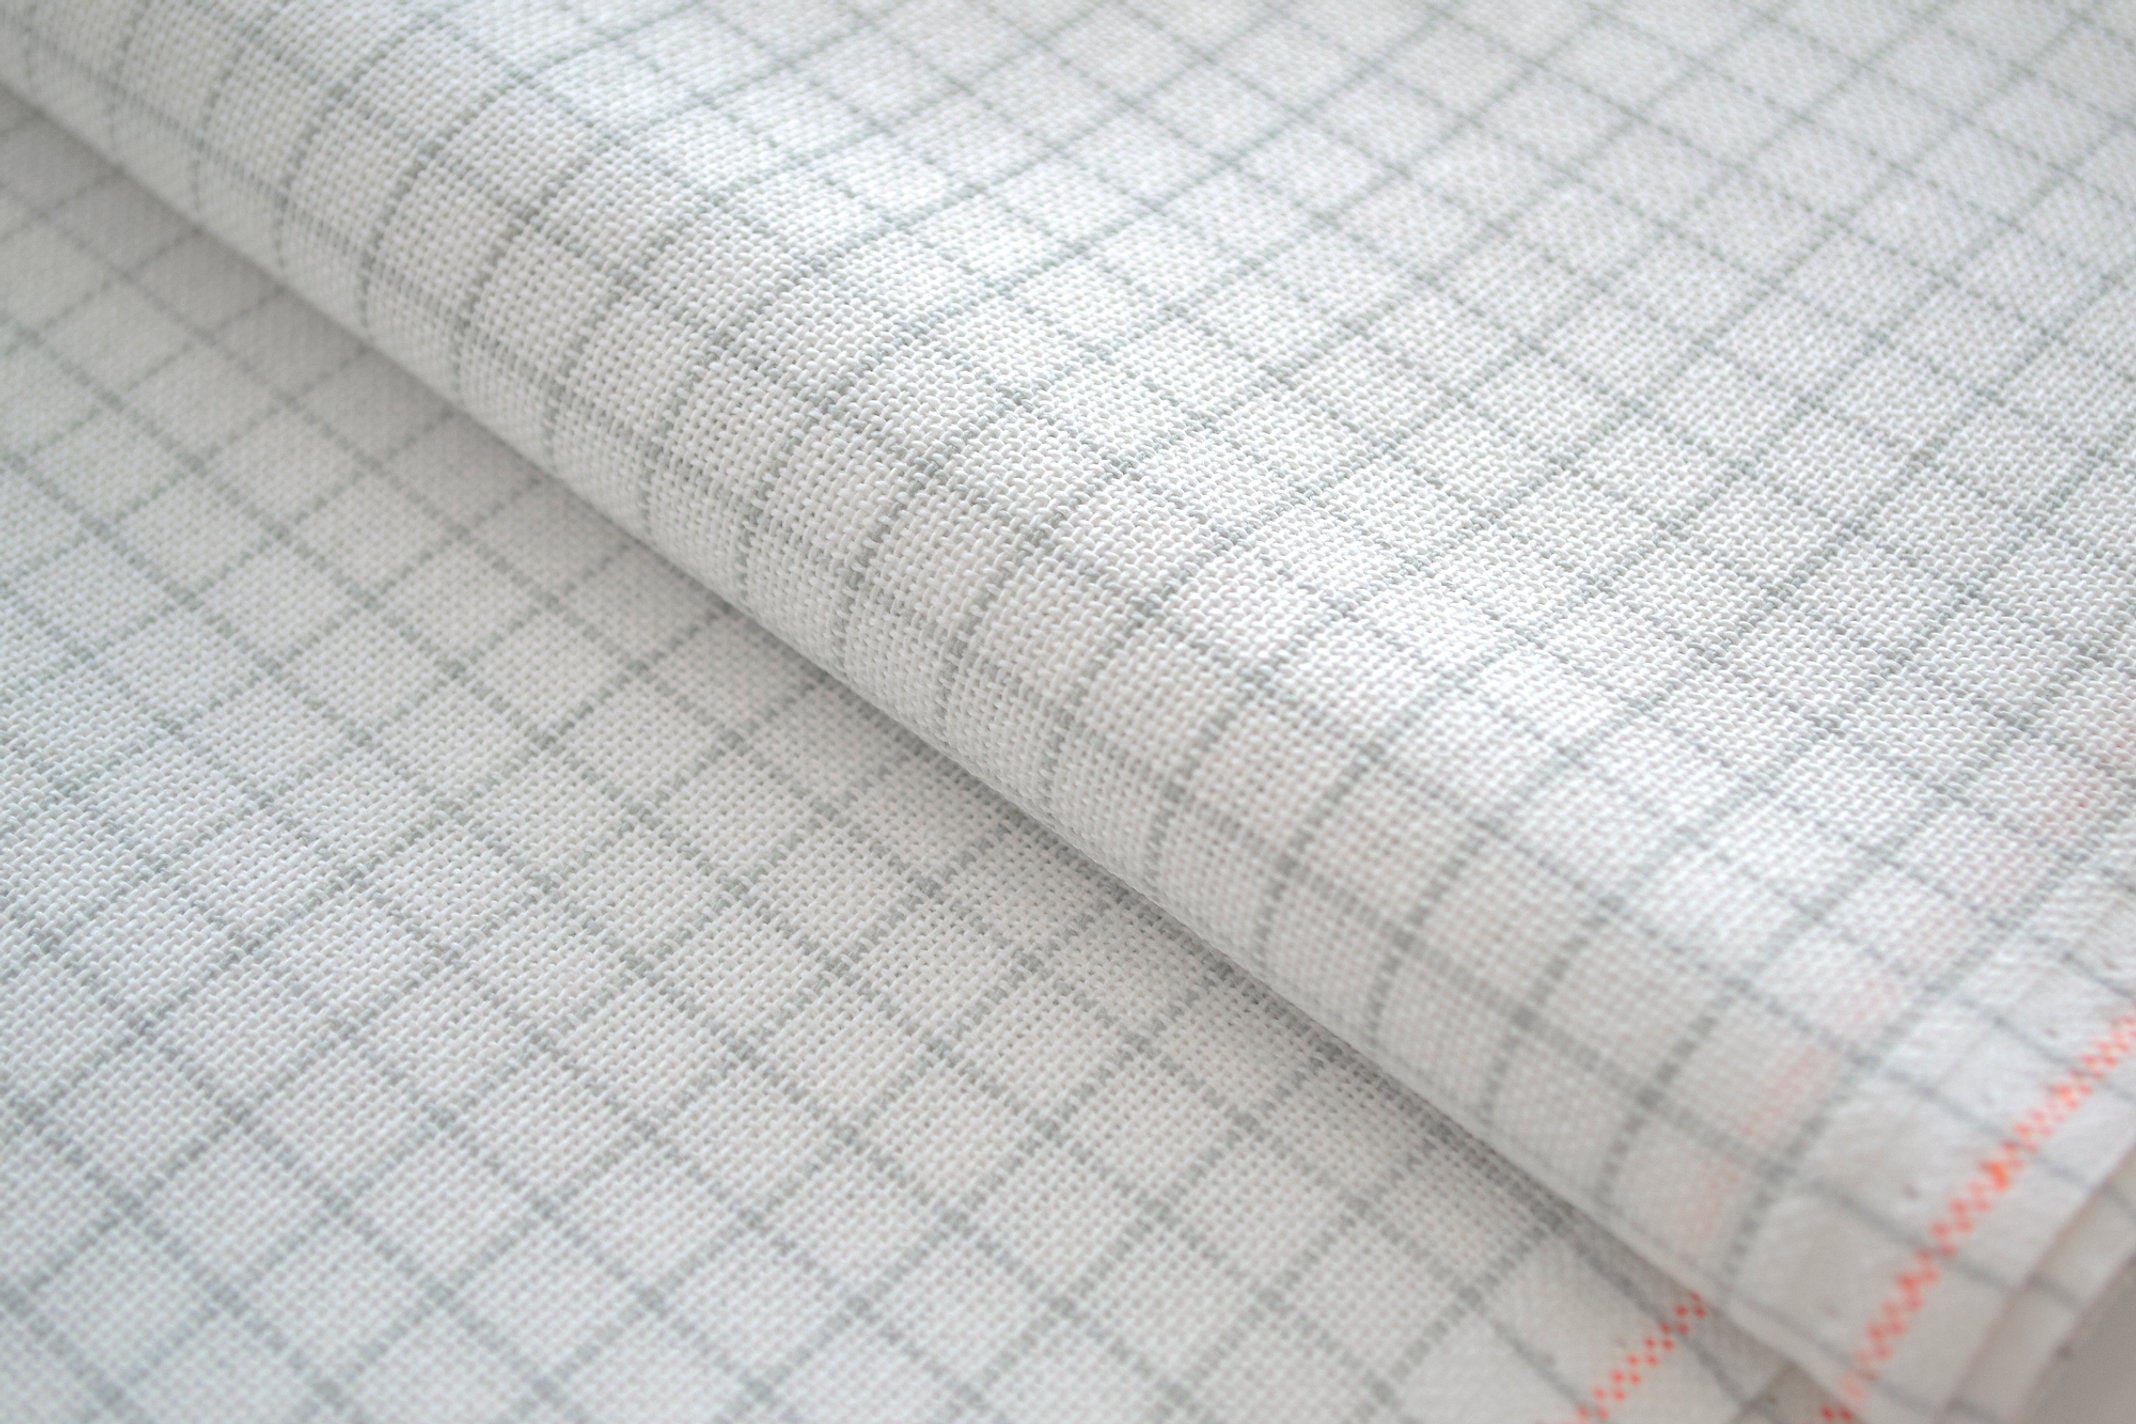 Grid Lugana pre-scored fabric 25 ct. / Color 1219 - ZWEIGART for Cross Stitch